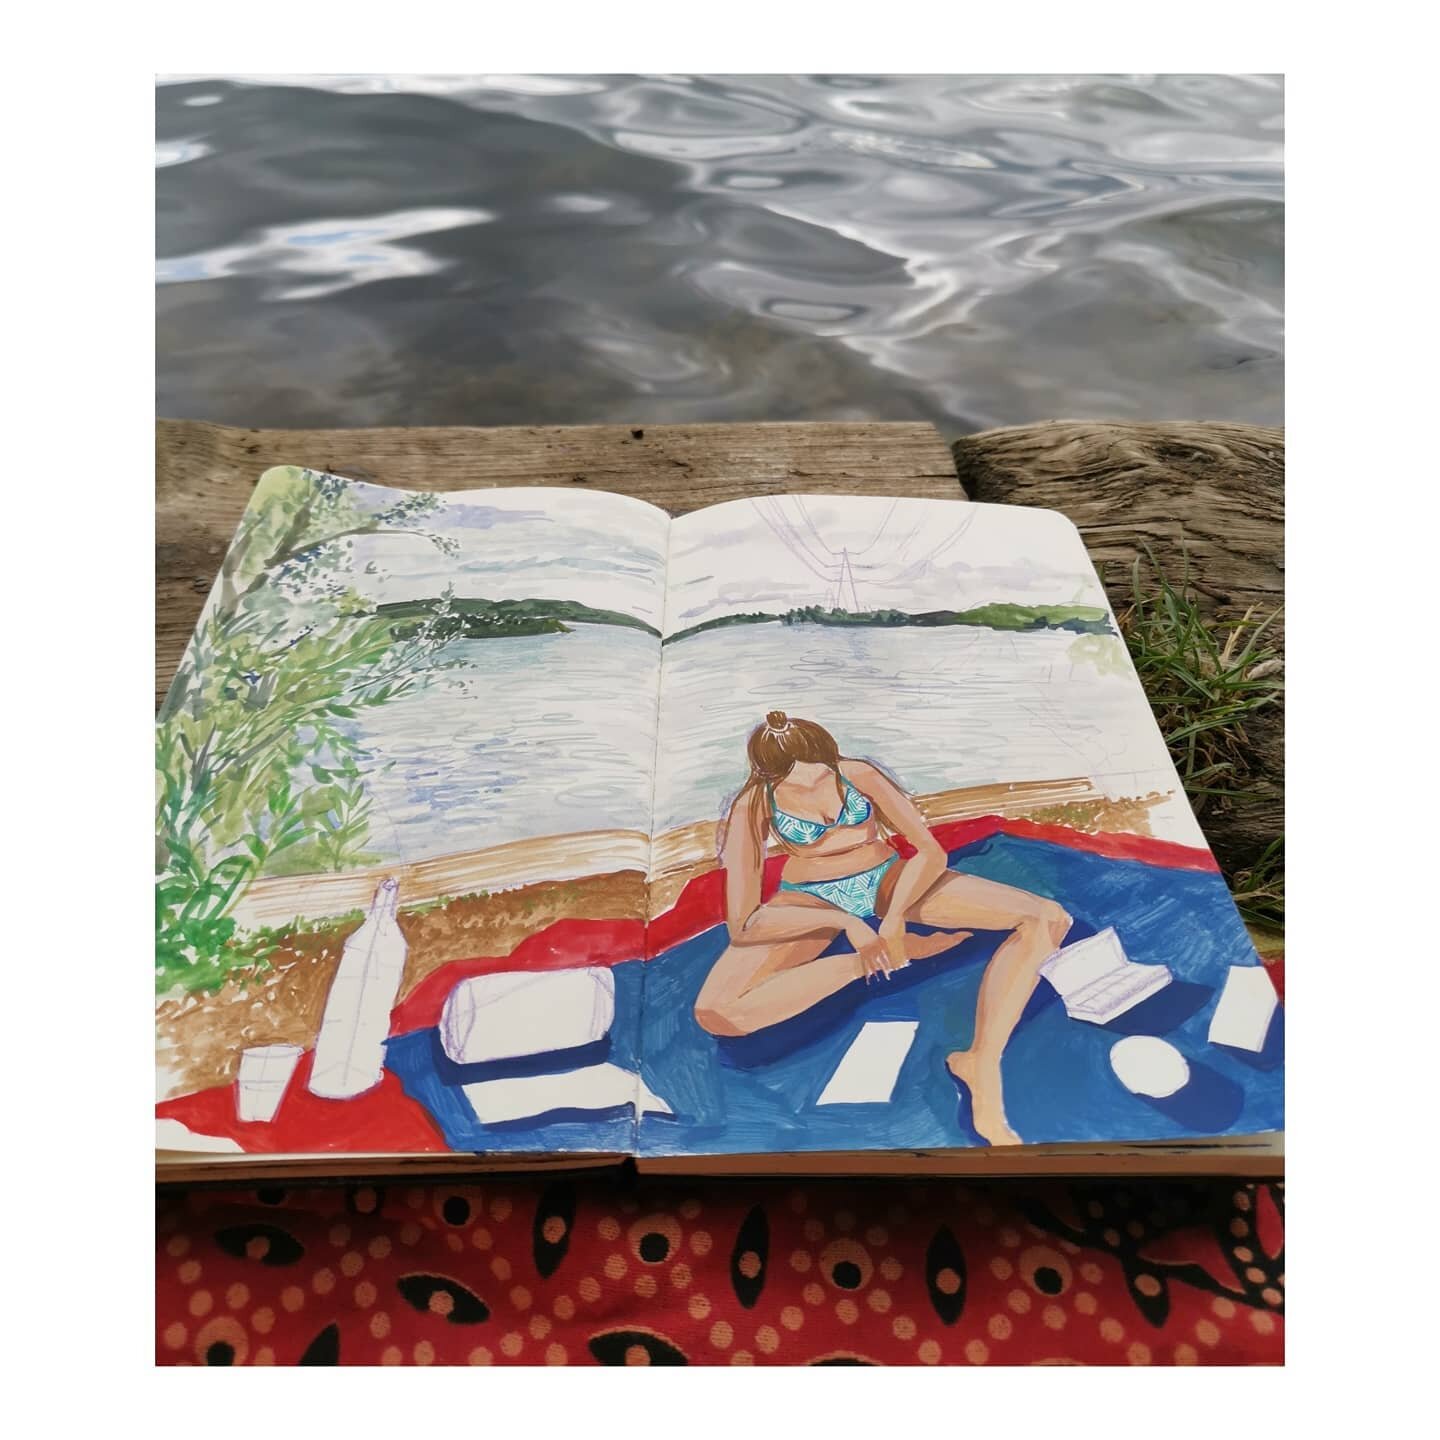 So happy to finally get my gouache out again - don't know why it took me so long! 
I painted this sort of imaginary self portrait of myself sketching/outlining my next online course in this beautiful swimming spot.